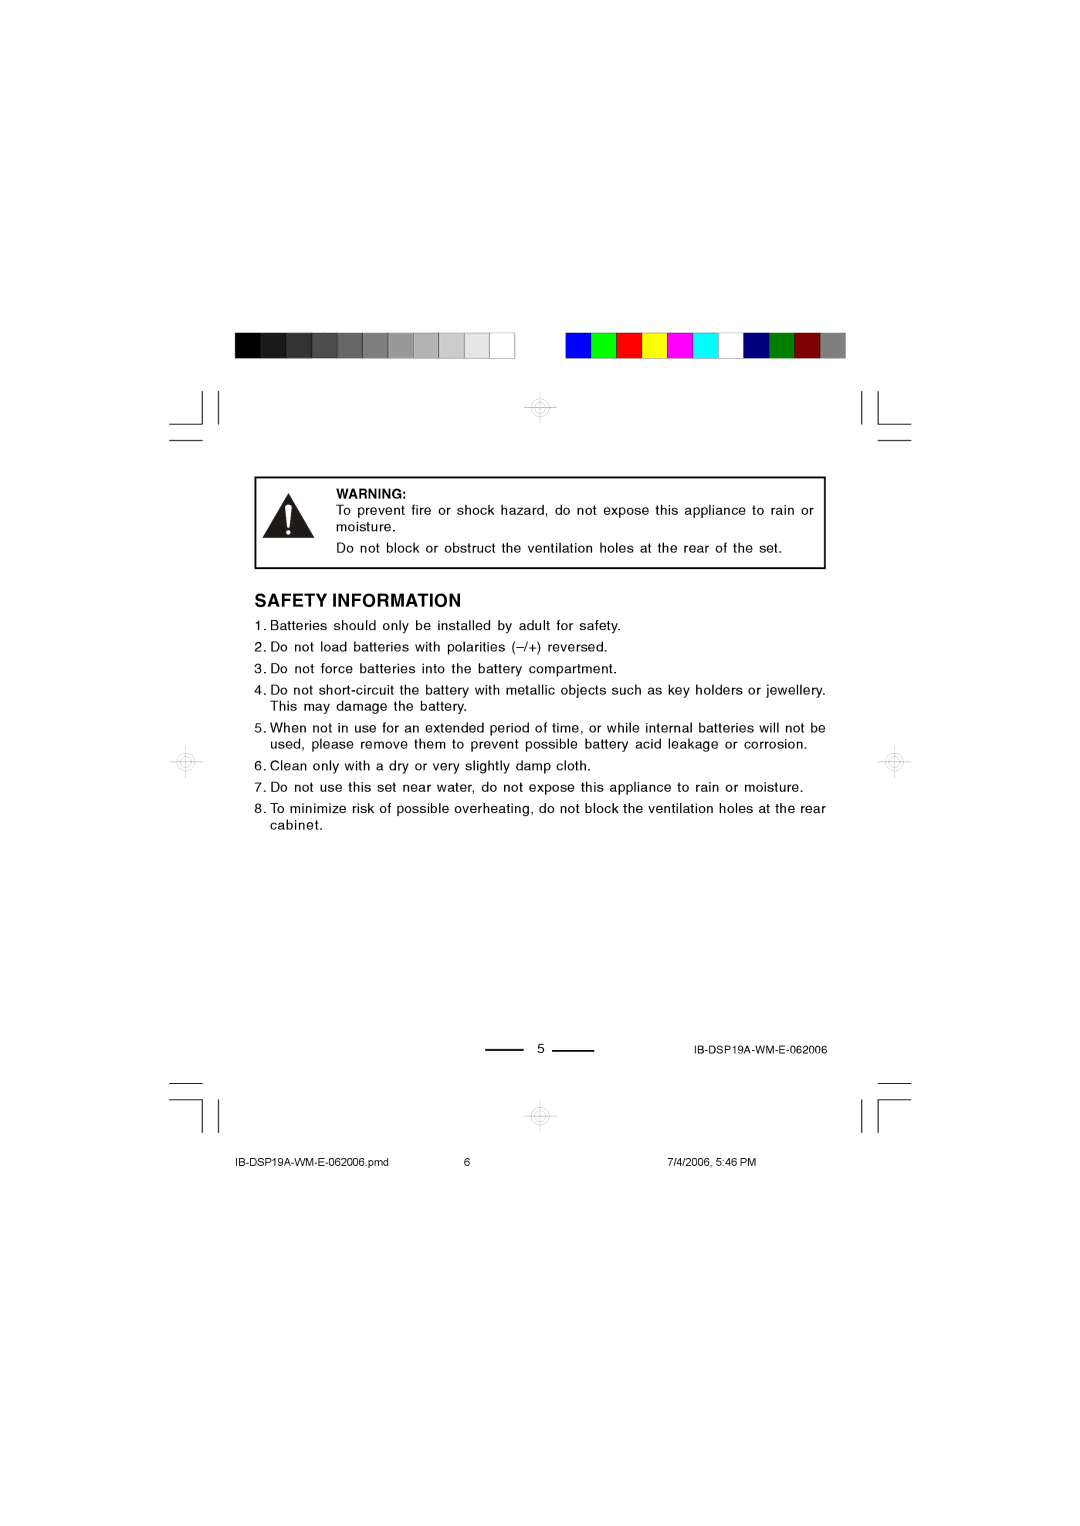 Lenoxx Electronics DSP-19A operating instructions Safety Information 